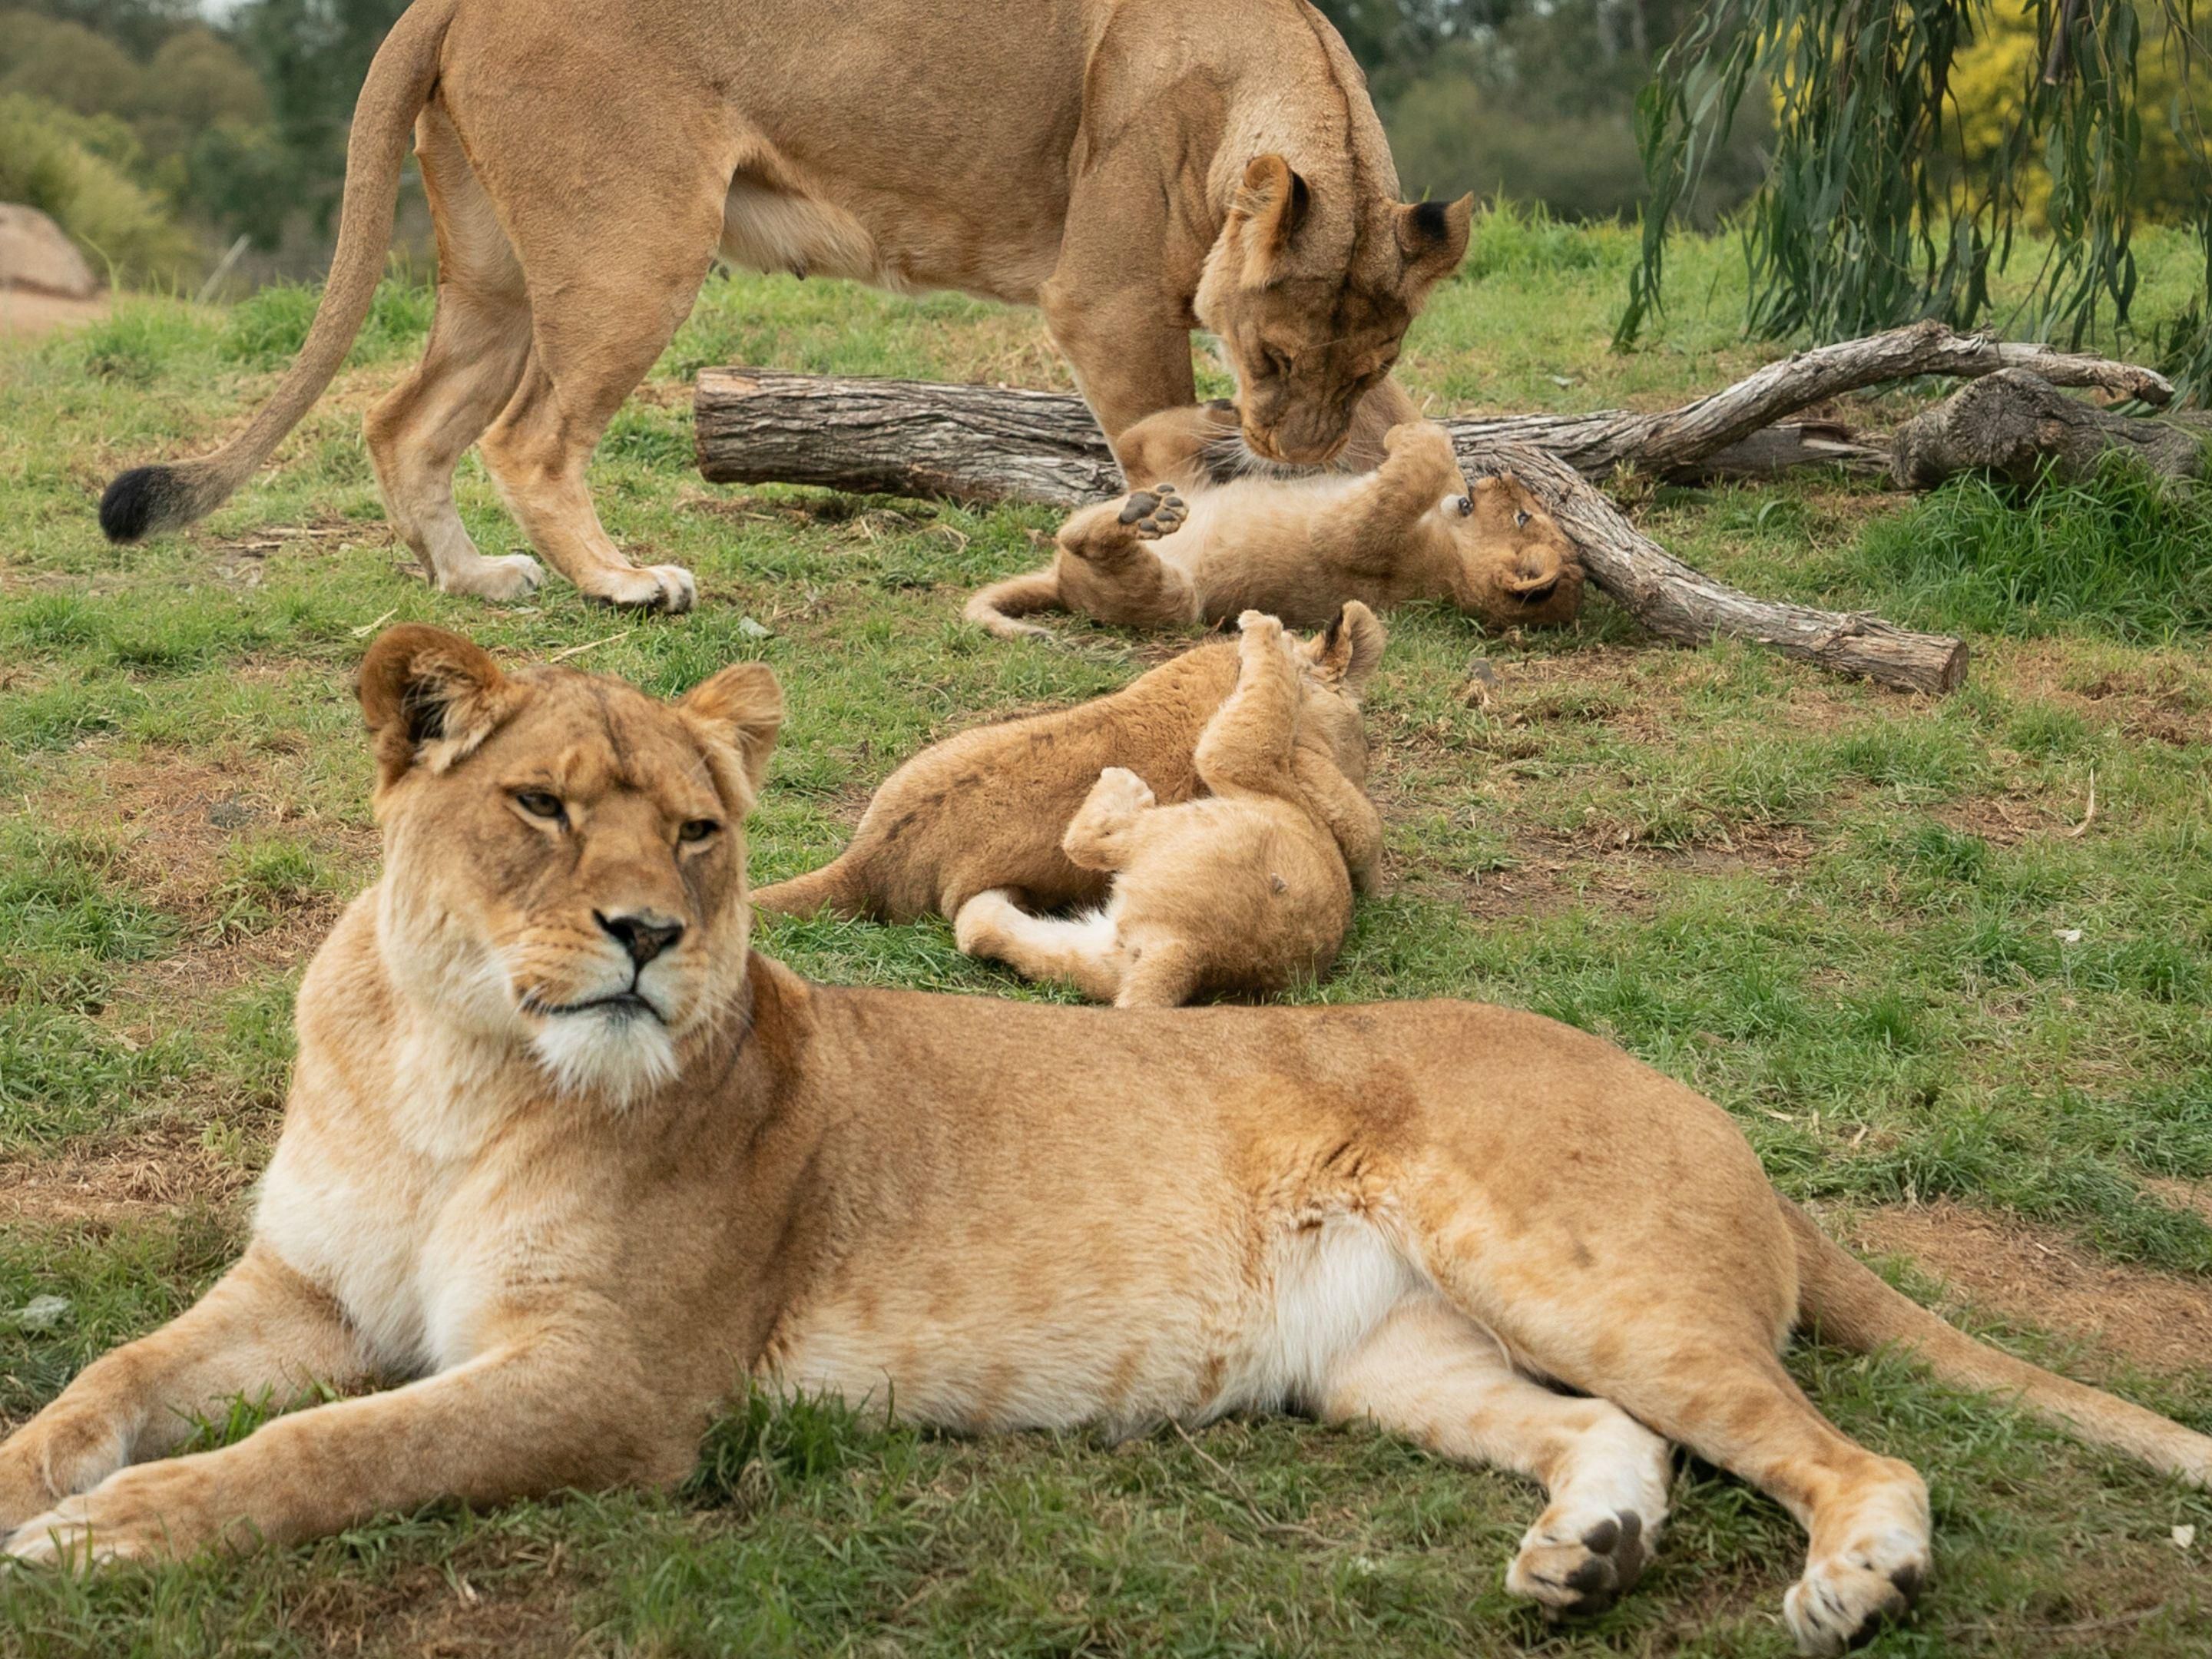 Embark on an African adventure - Just 7 minutes from Holiday Inn Werribee. Enjoy a  free guided safari through their unique savannah, where you can marvel at rhinos, giraffes, and zebras! Don't forget to visit the brand new lion cubs!